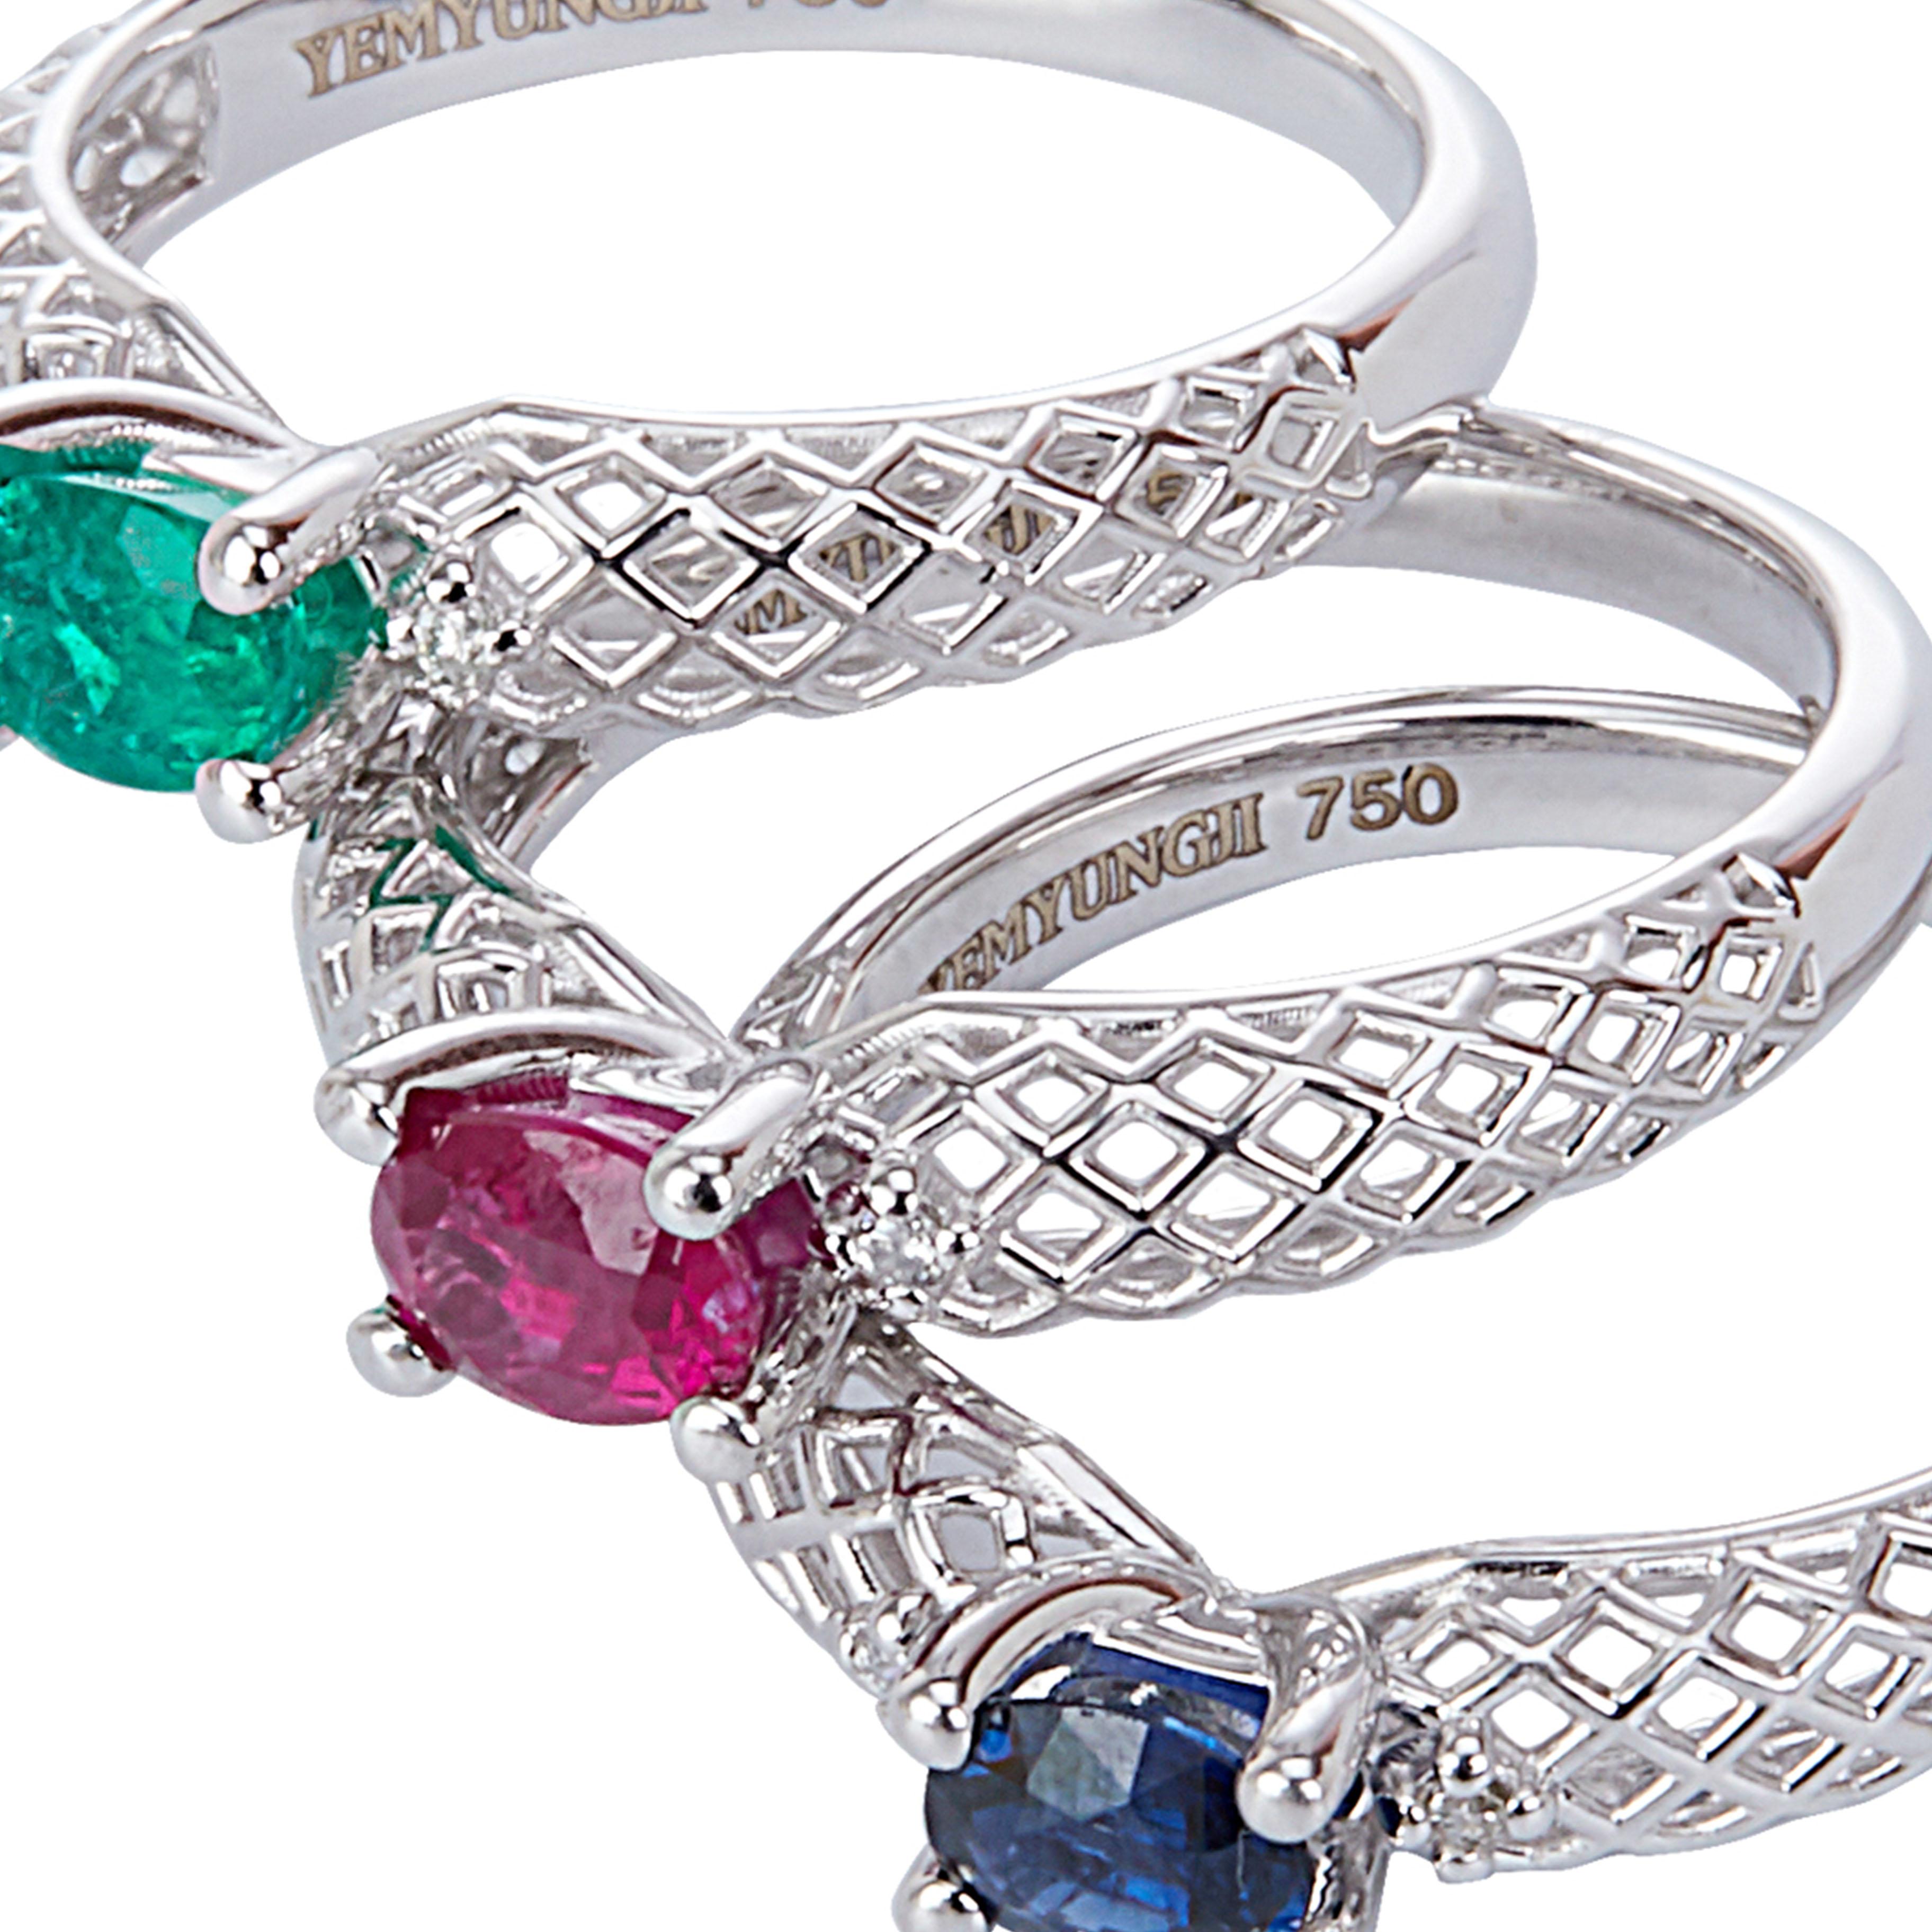 Yemyungji Emerald Ruby Sapphire Oval Cut Solitaire Layering Ring Set For Sale 4